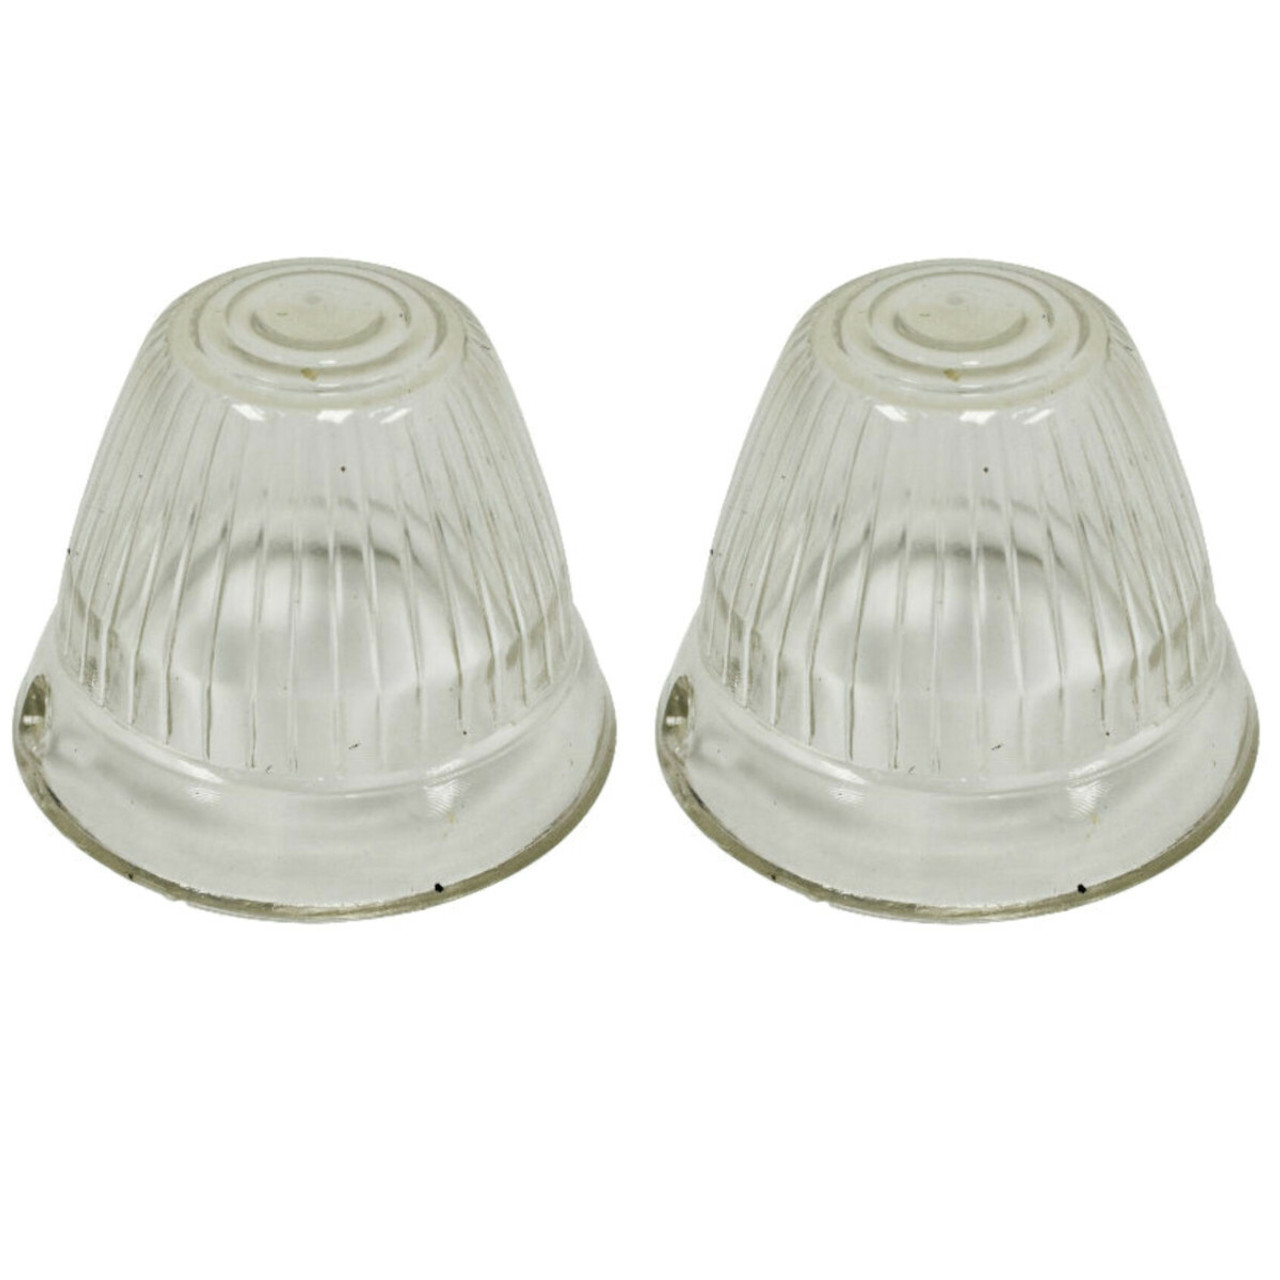 Turn Signal Lenses, Pair - Compatible with VW Type-1 Bug 1955-1957 / Type-2 Bus 1956-1962